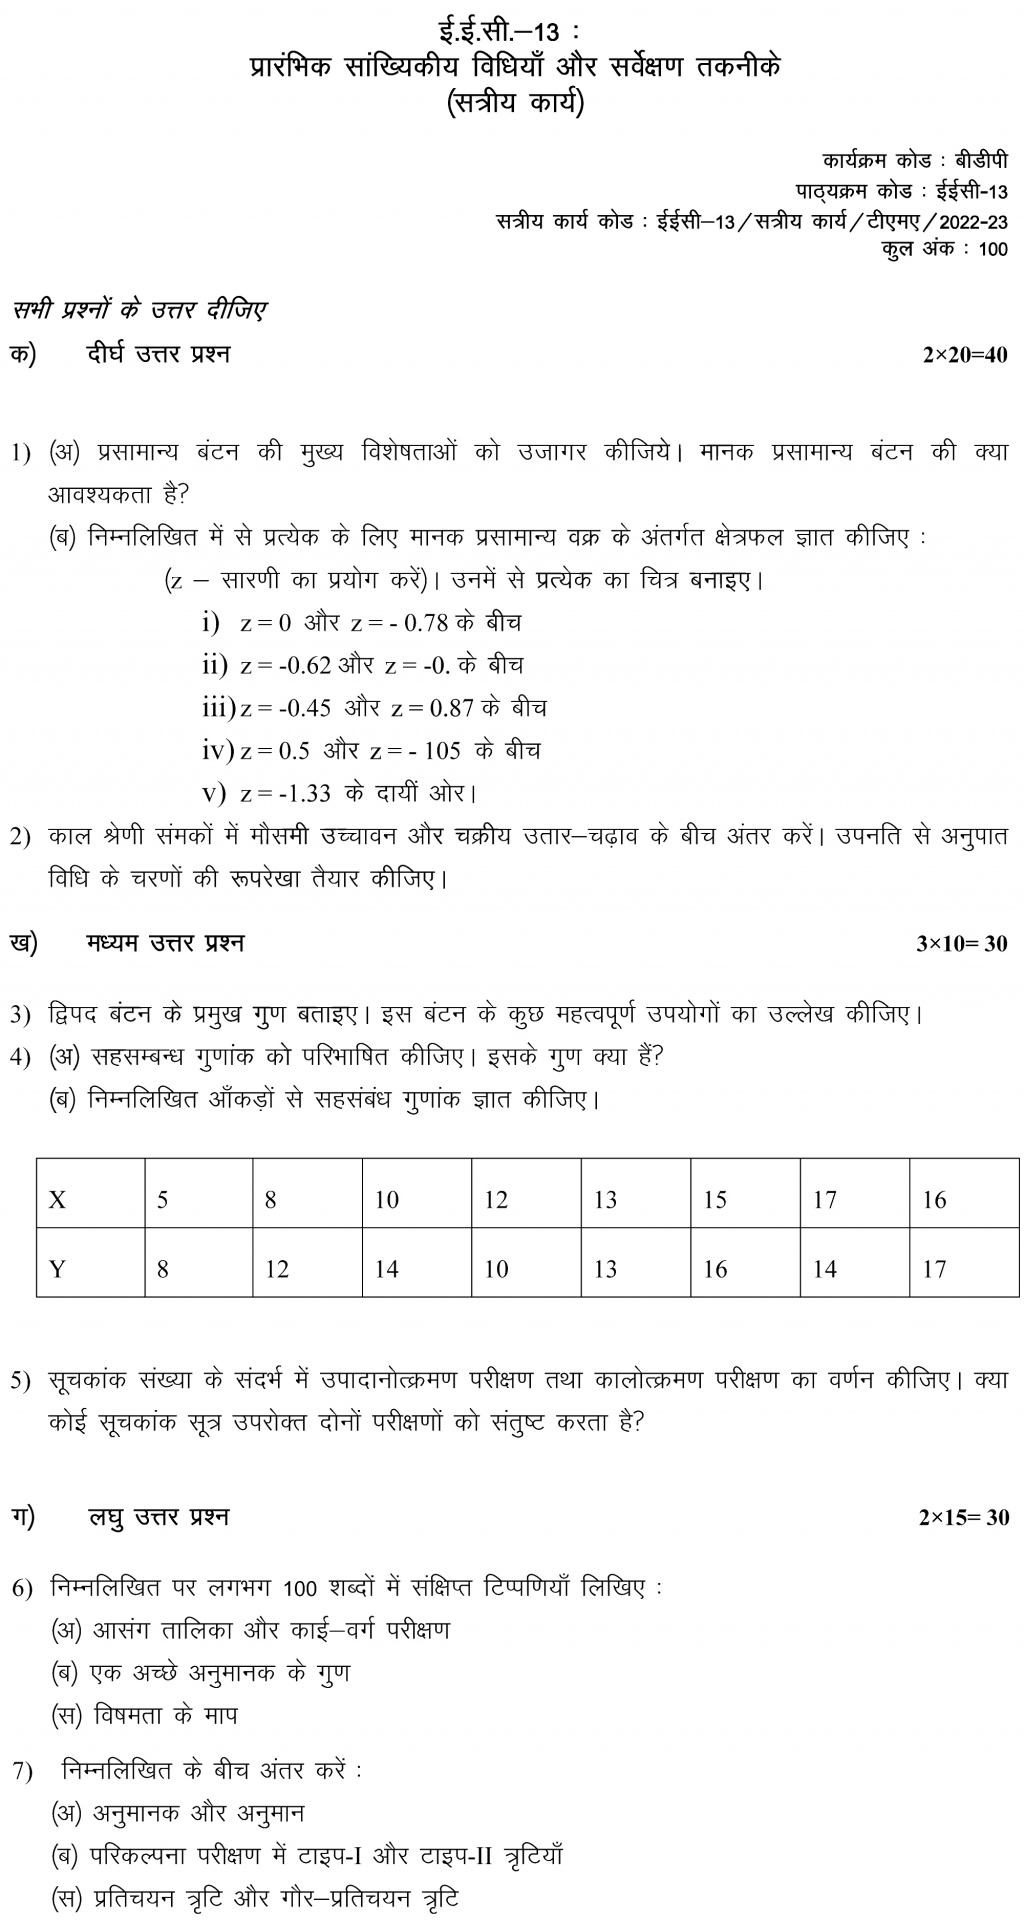 IGNOU EEC-13 - Elementary Statistical Methods and Survey Techniques, Latest Solved Assignment-July 2022 – January 2023